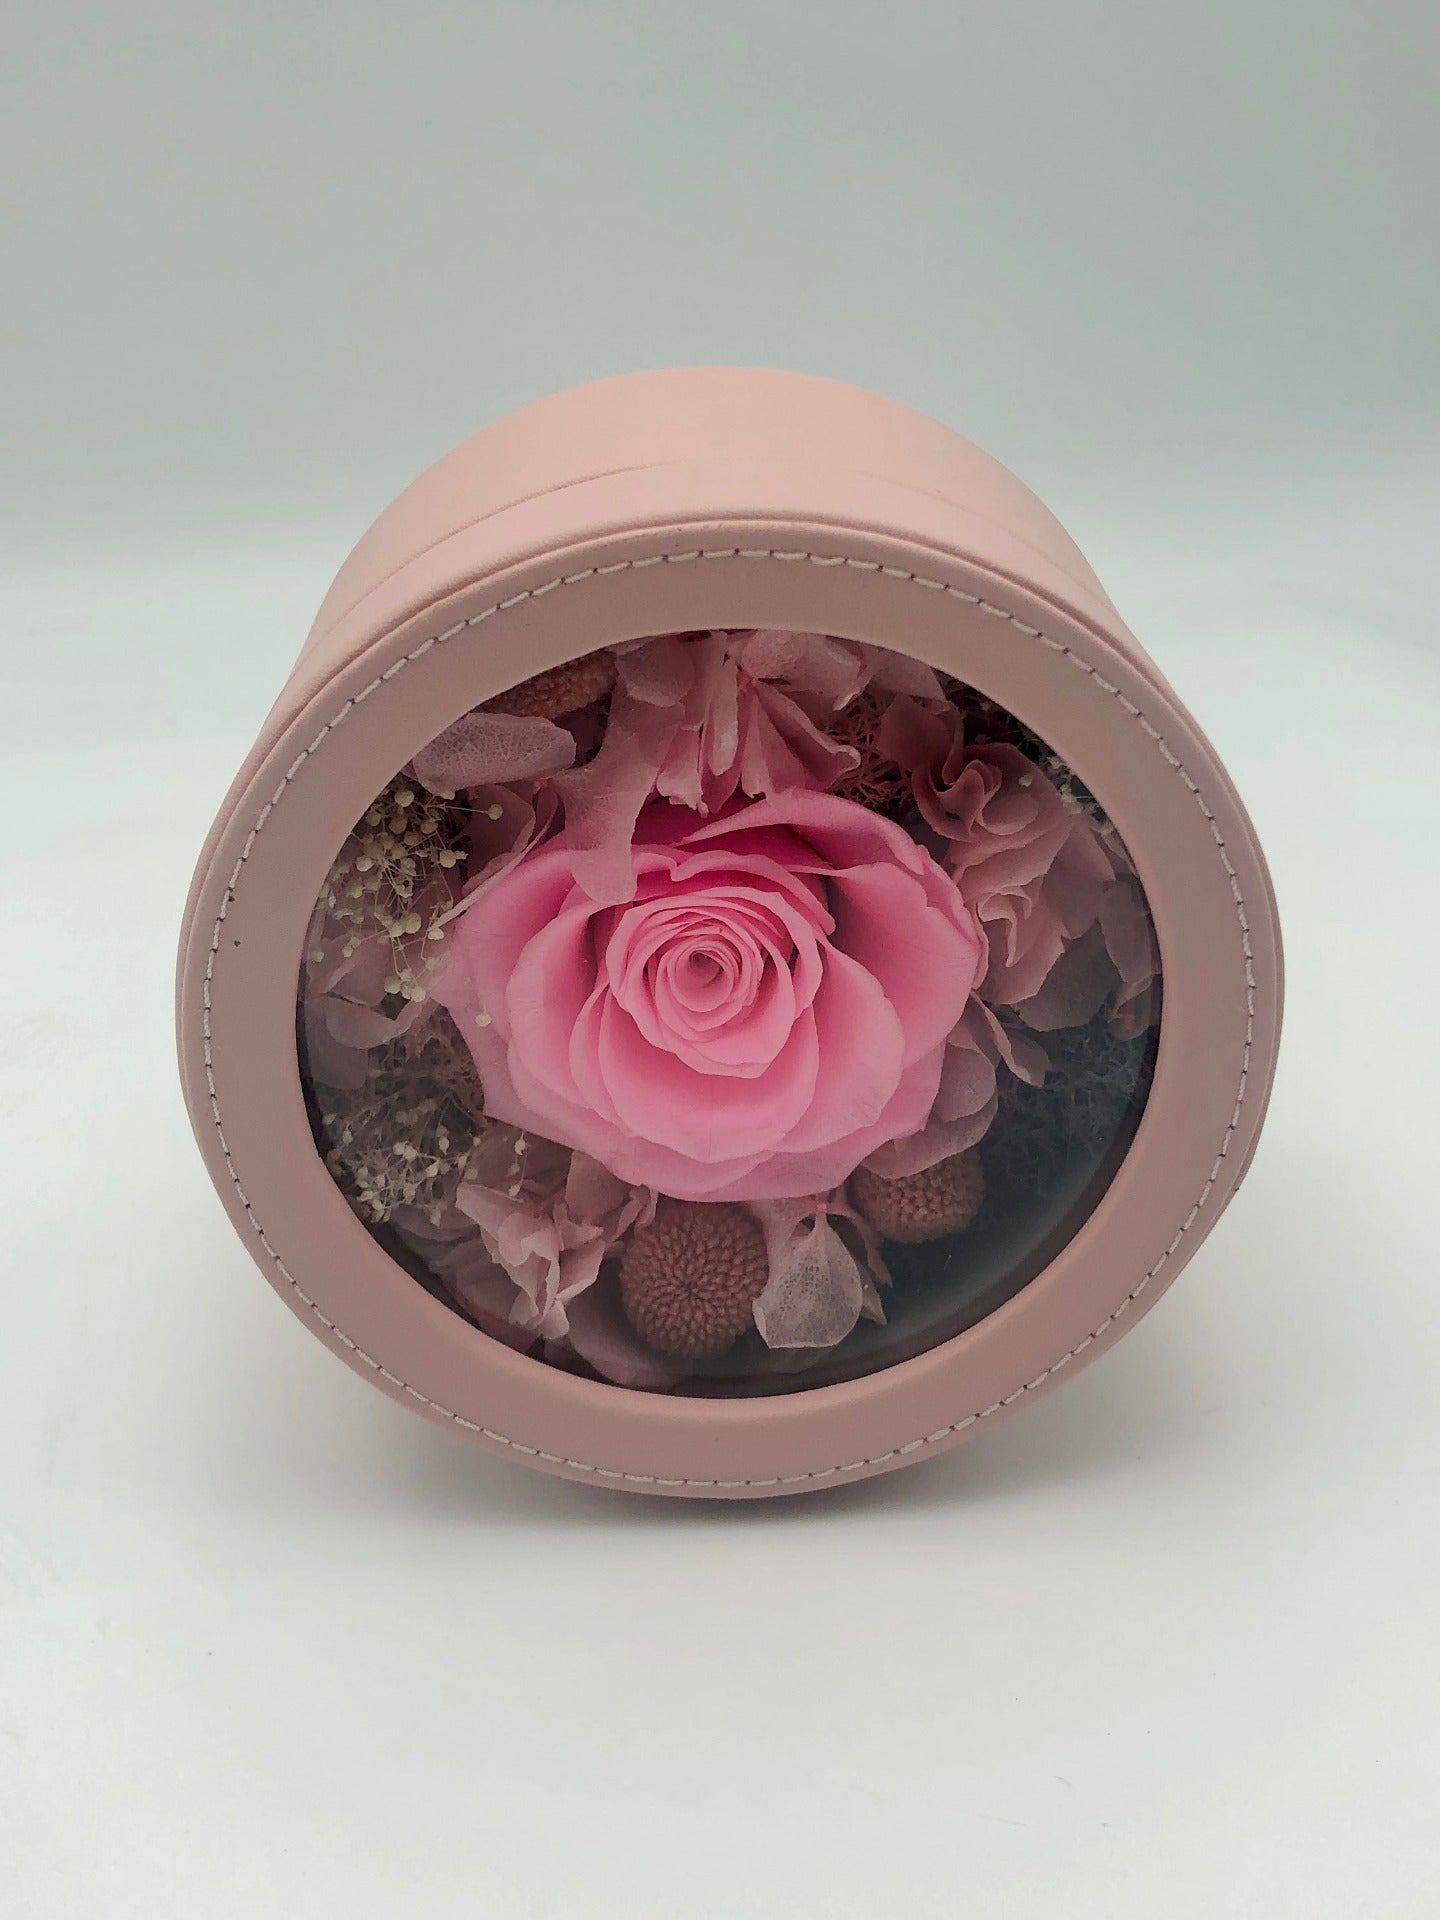 A photo of a lovely pink gift box containing a preserved pink rose and other flowers. The clear window on the lid allows a peek into the beautiful arrangement inside. Perfect for any special occasion!